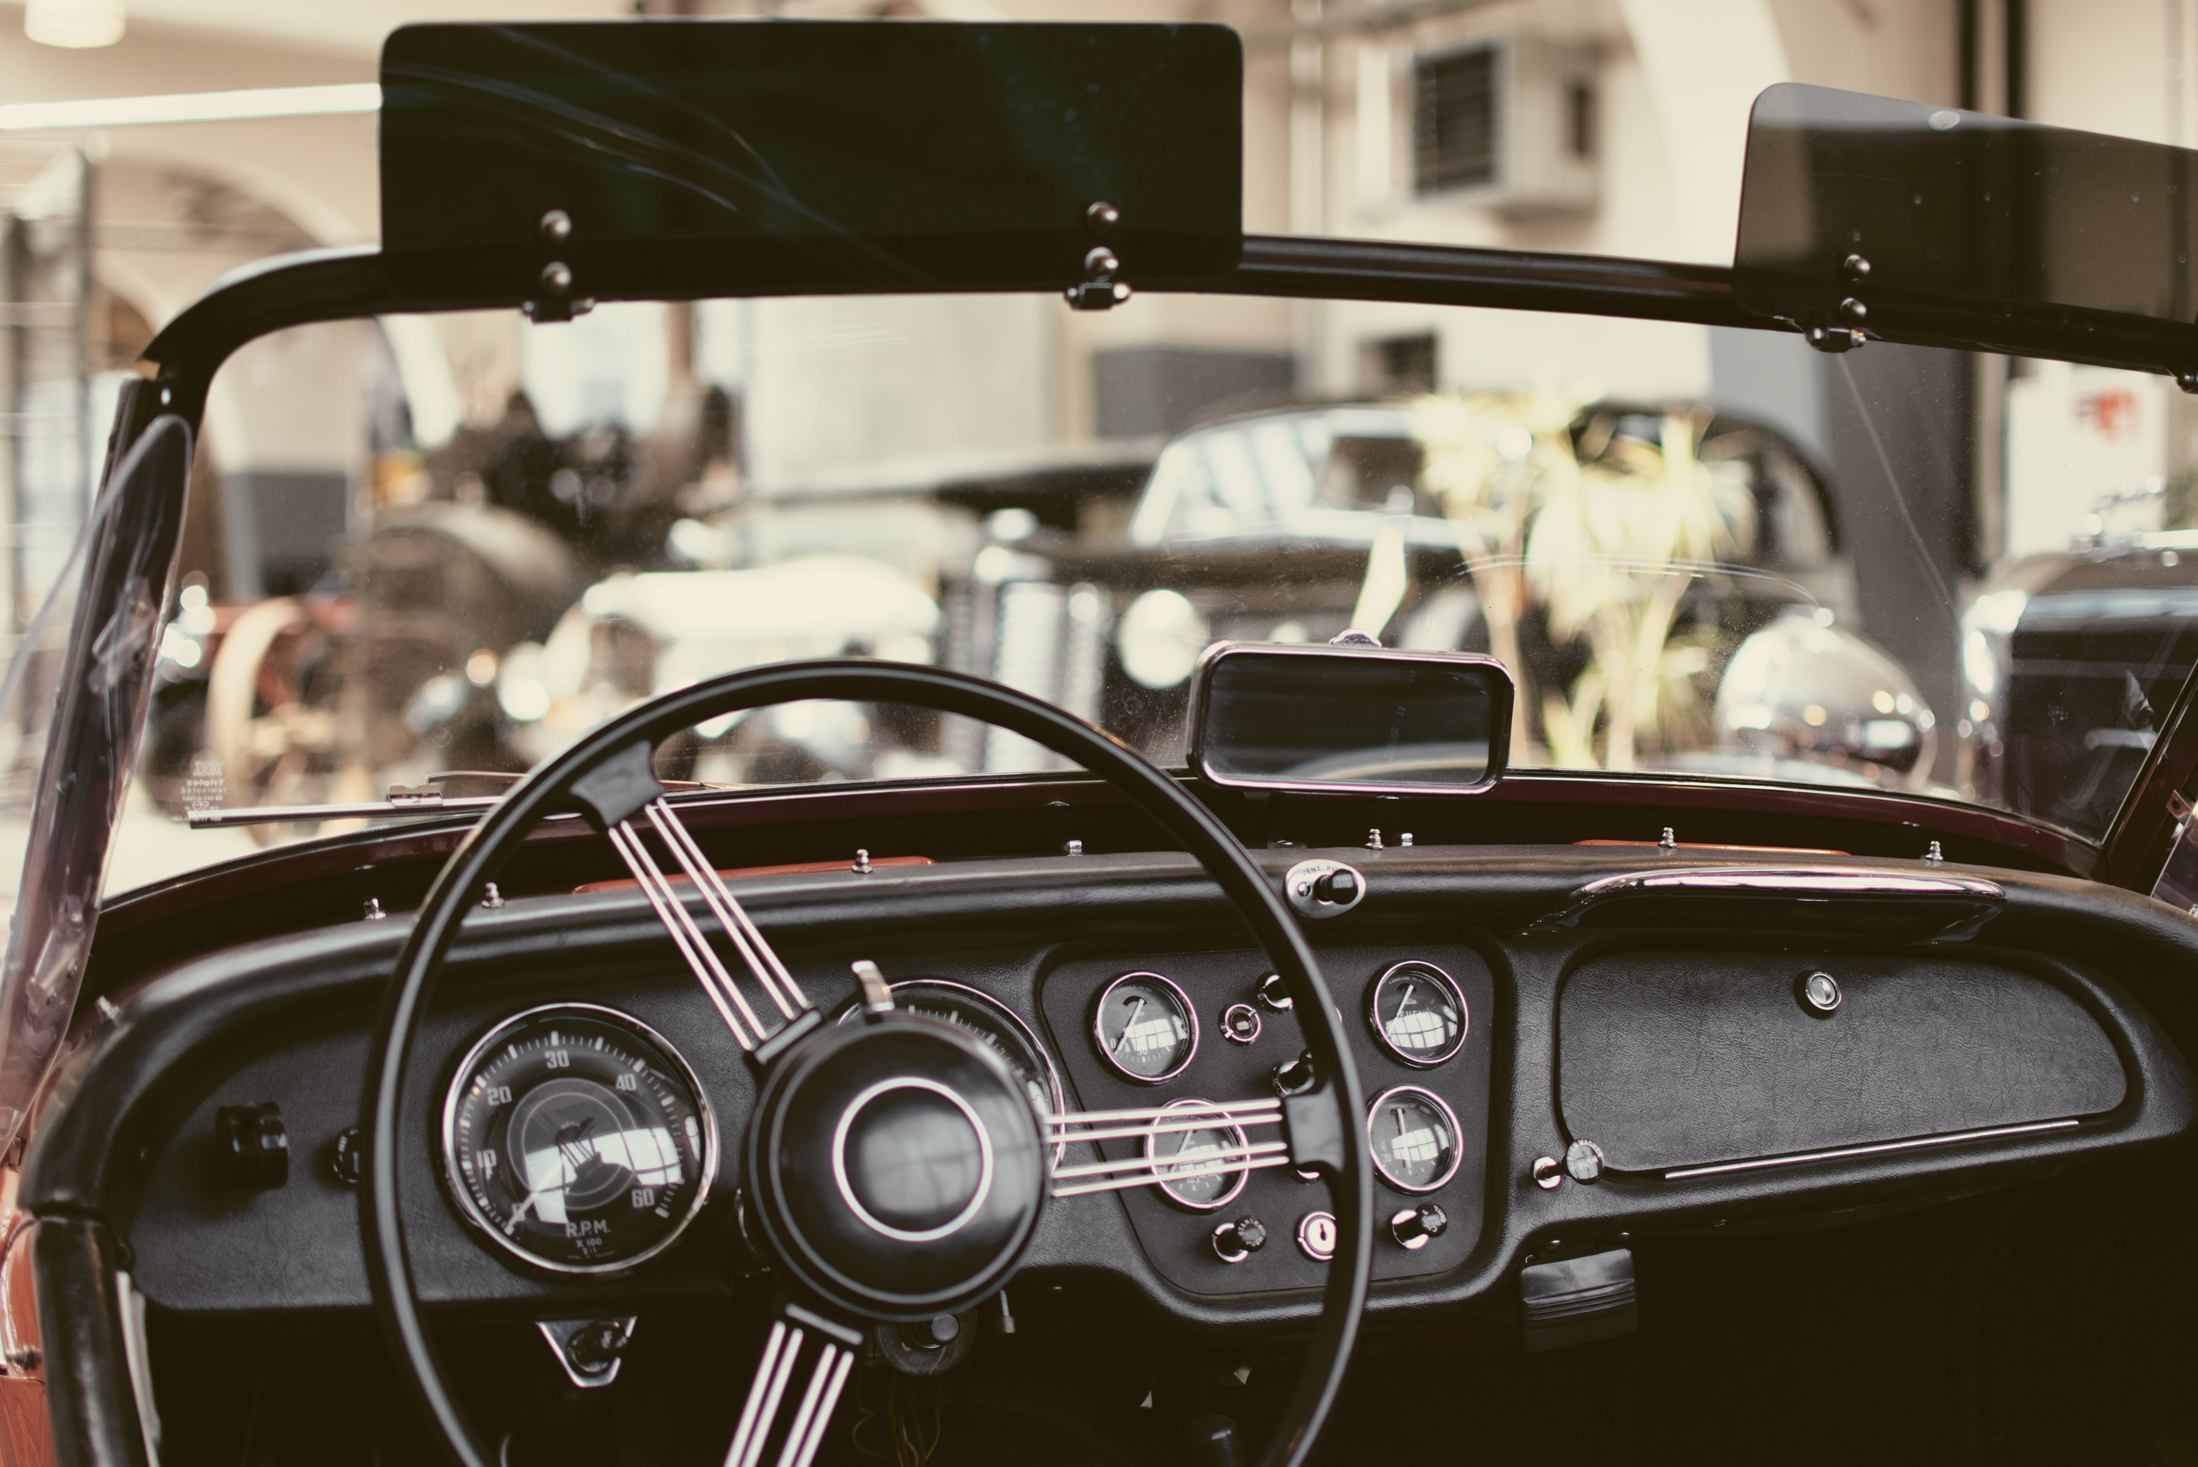 An inside view from a car showing the steering wheel of an old convertible. Other vintage cars can be seen through the window, but they are not clearly visible.